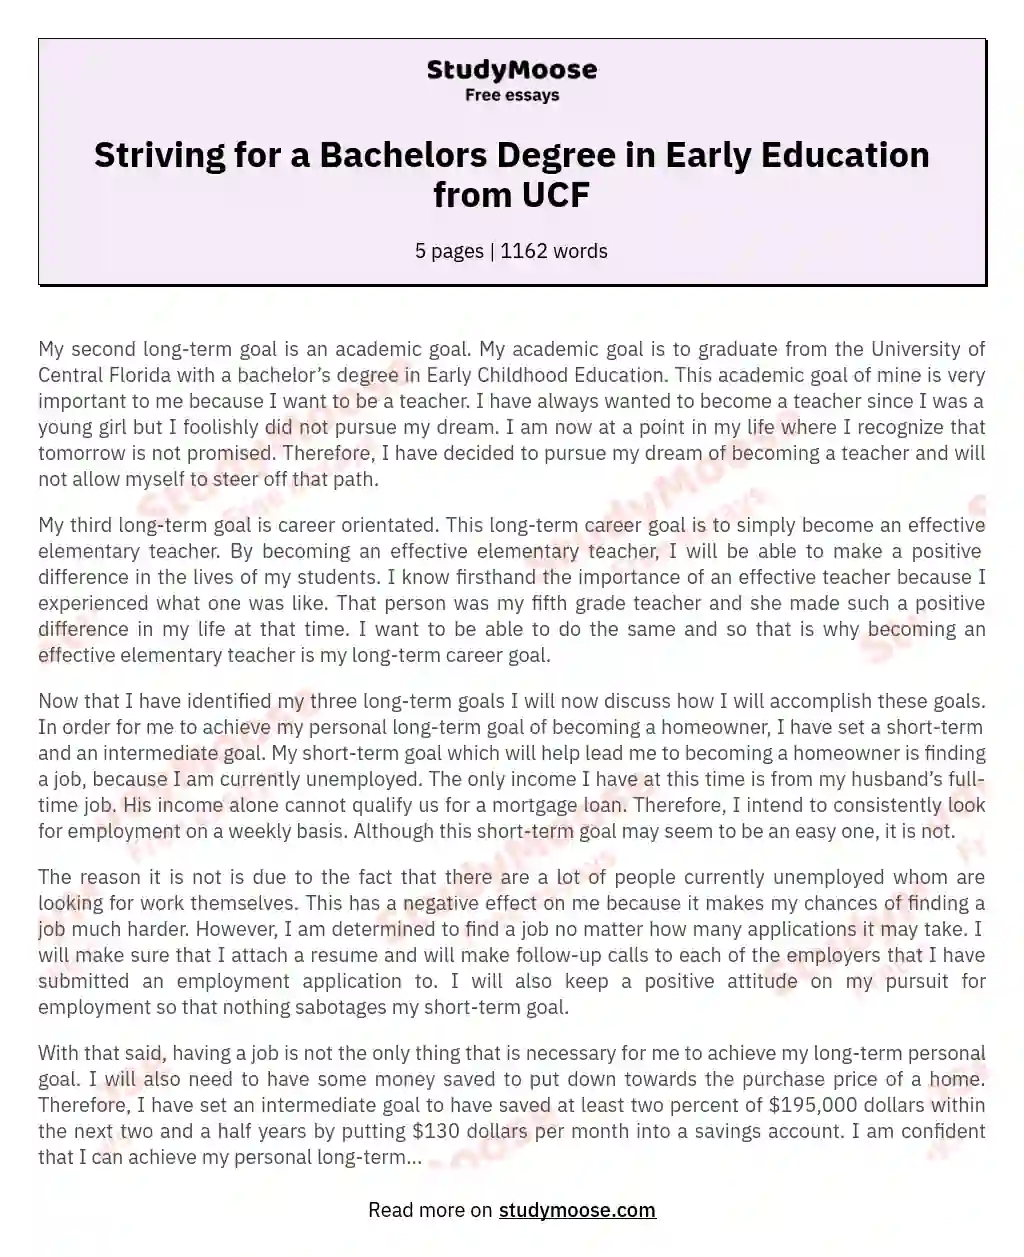 Striving for a Bachelors Degree in Early Education from UCF essay